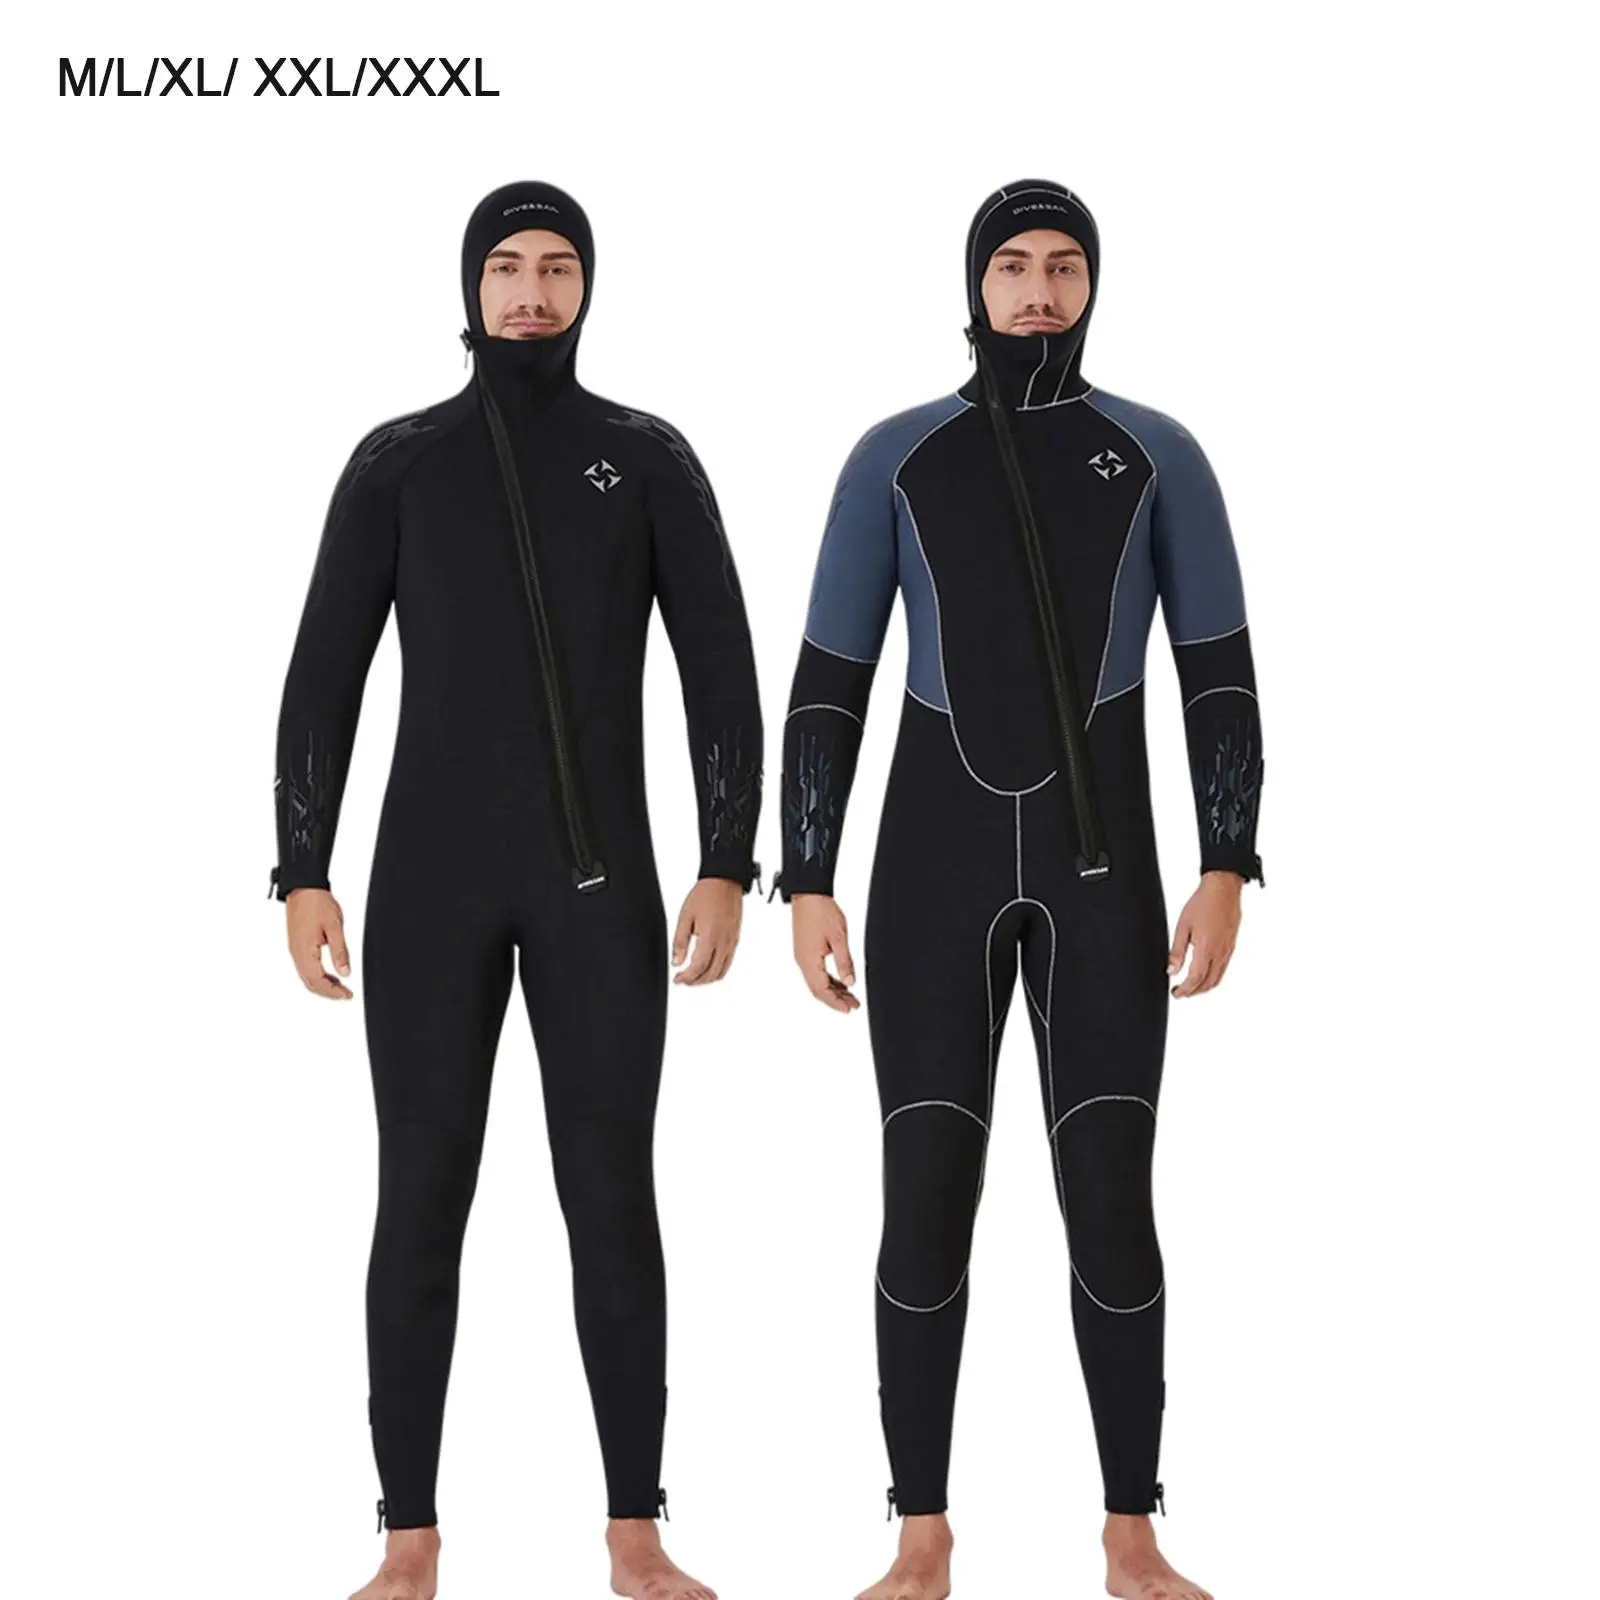 5mm Neoprene Wetsuit Full Body Diving Suit Front Zipper Wetsuit for Diving Snorkeling Surfing Swimming for Adults Men  Suit